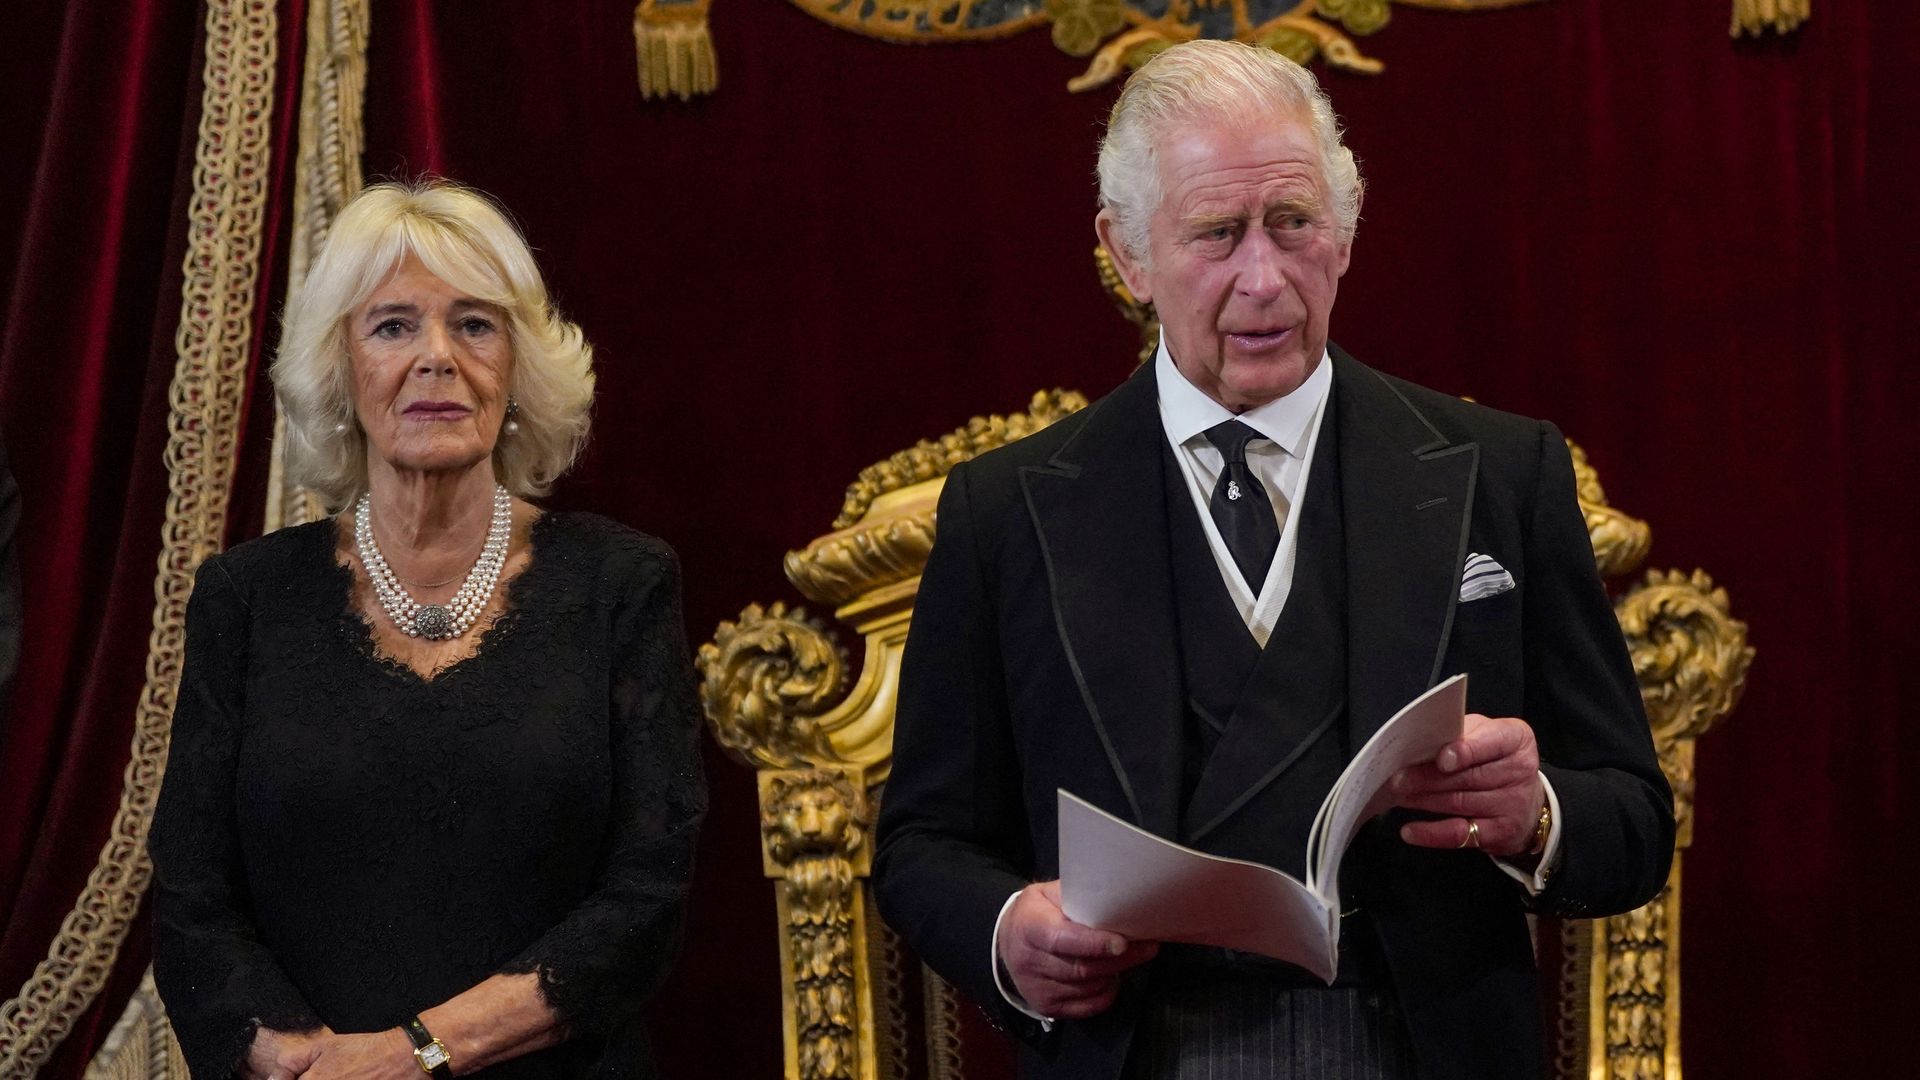 King Charles and Queen Consort Camilla in black